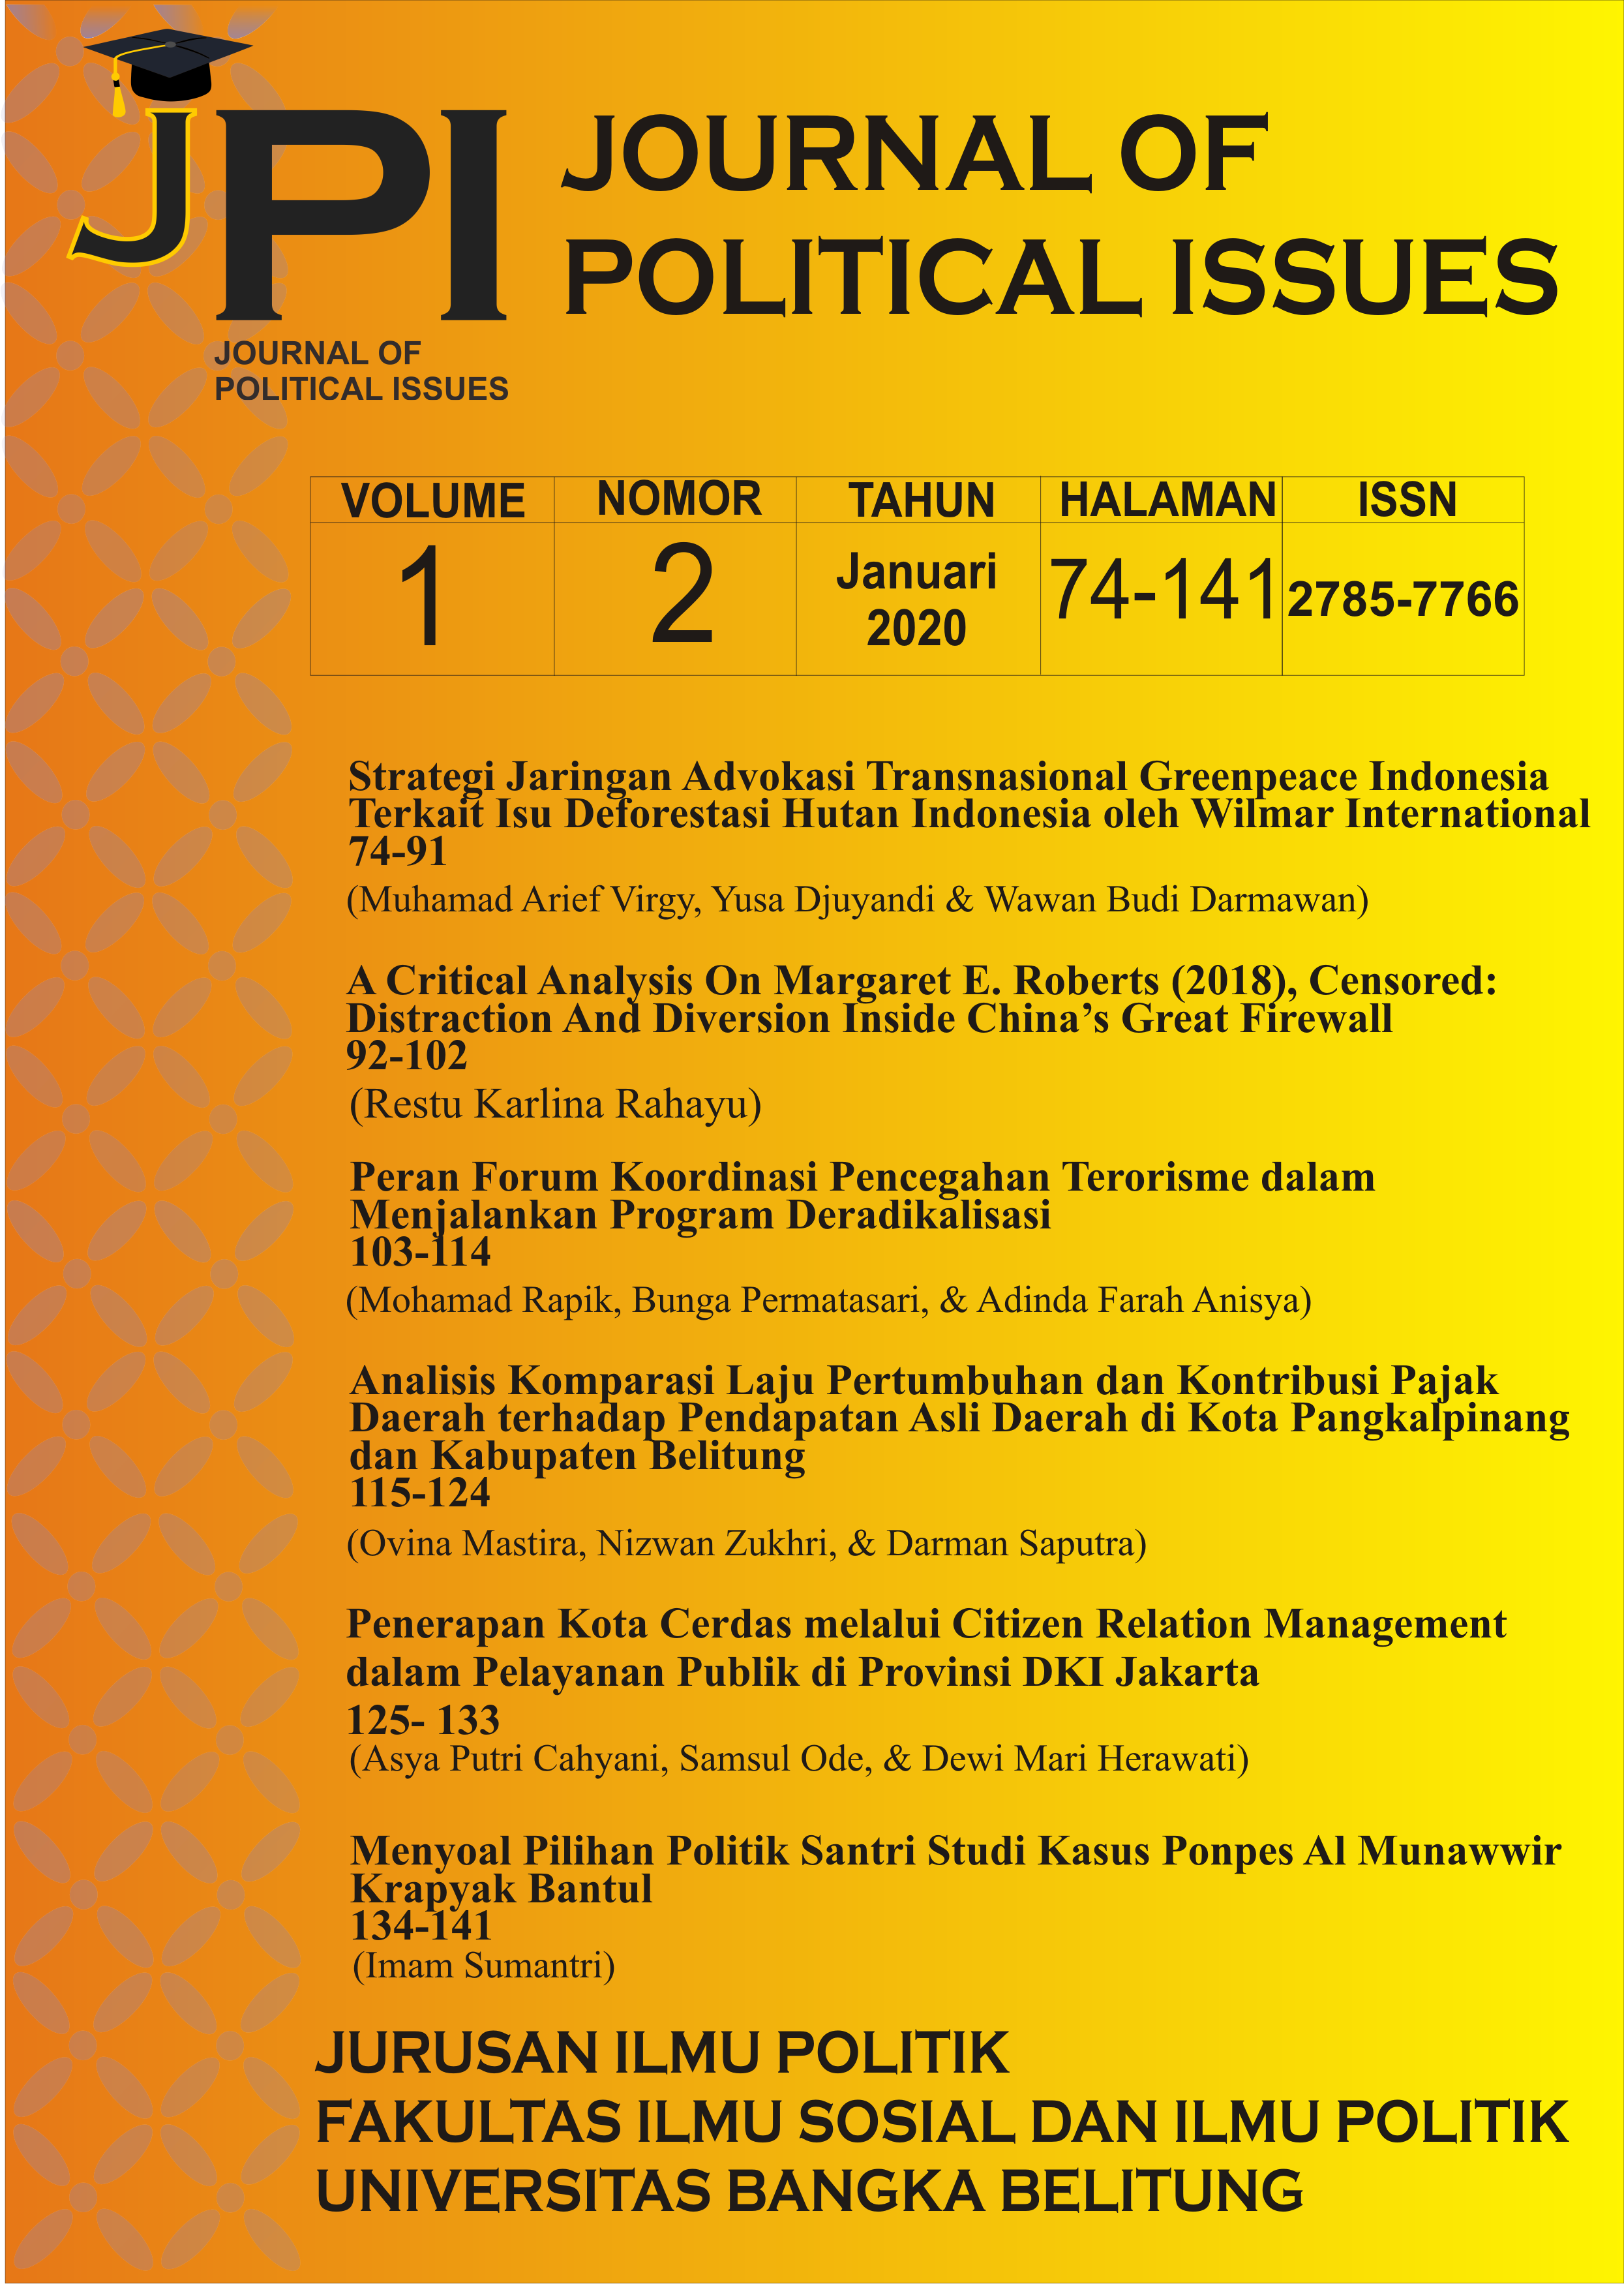 Journal of Political Issues Volume 1 Number 2